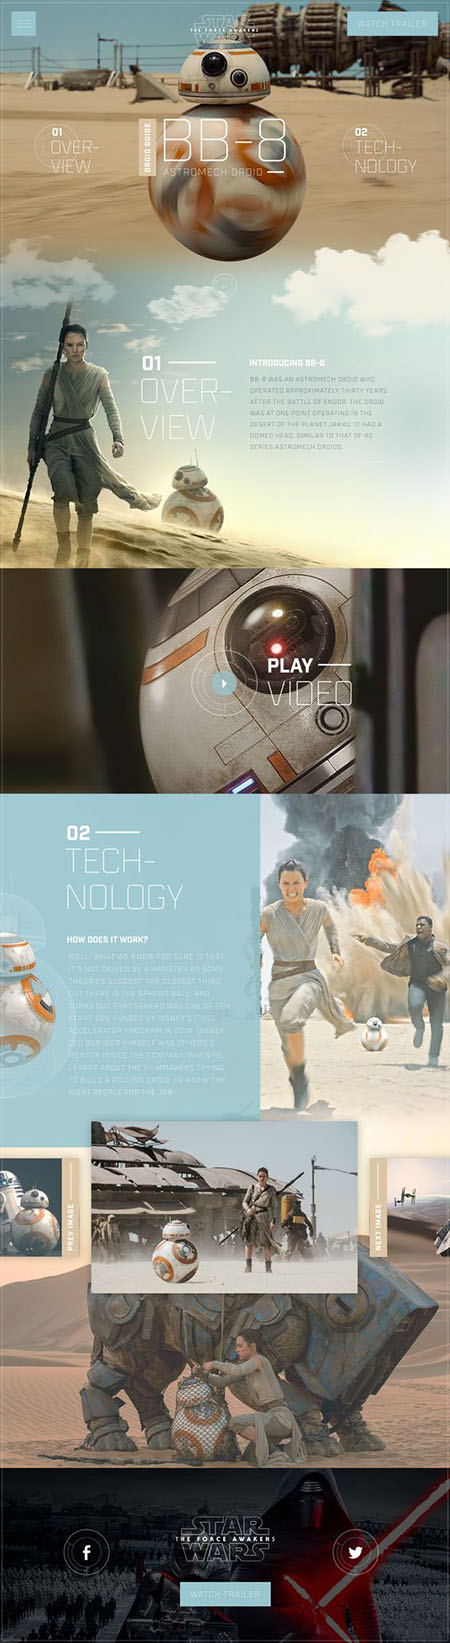 Star Wars The Force Awakens BB-8 Infographic by Nathan Riley